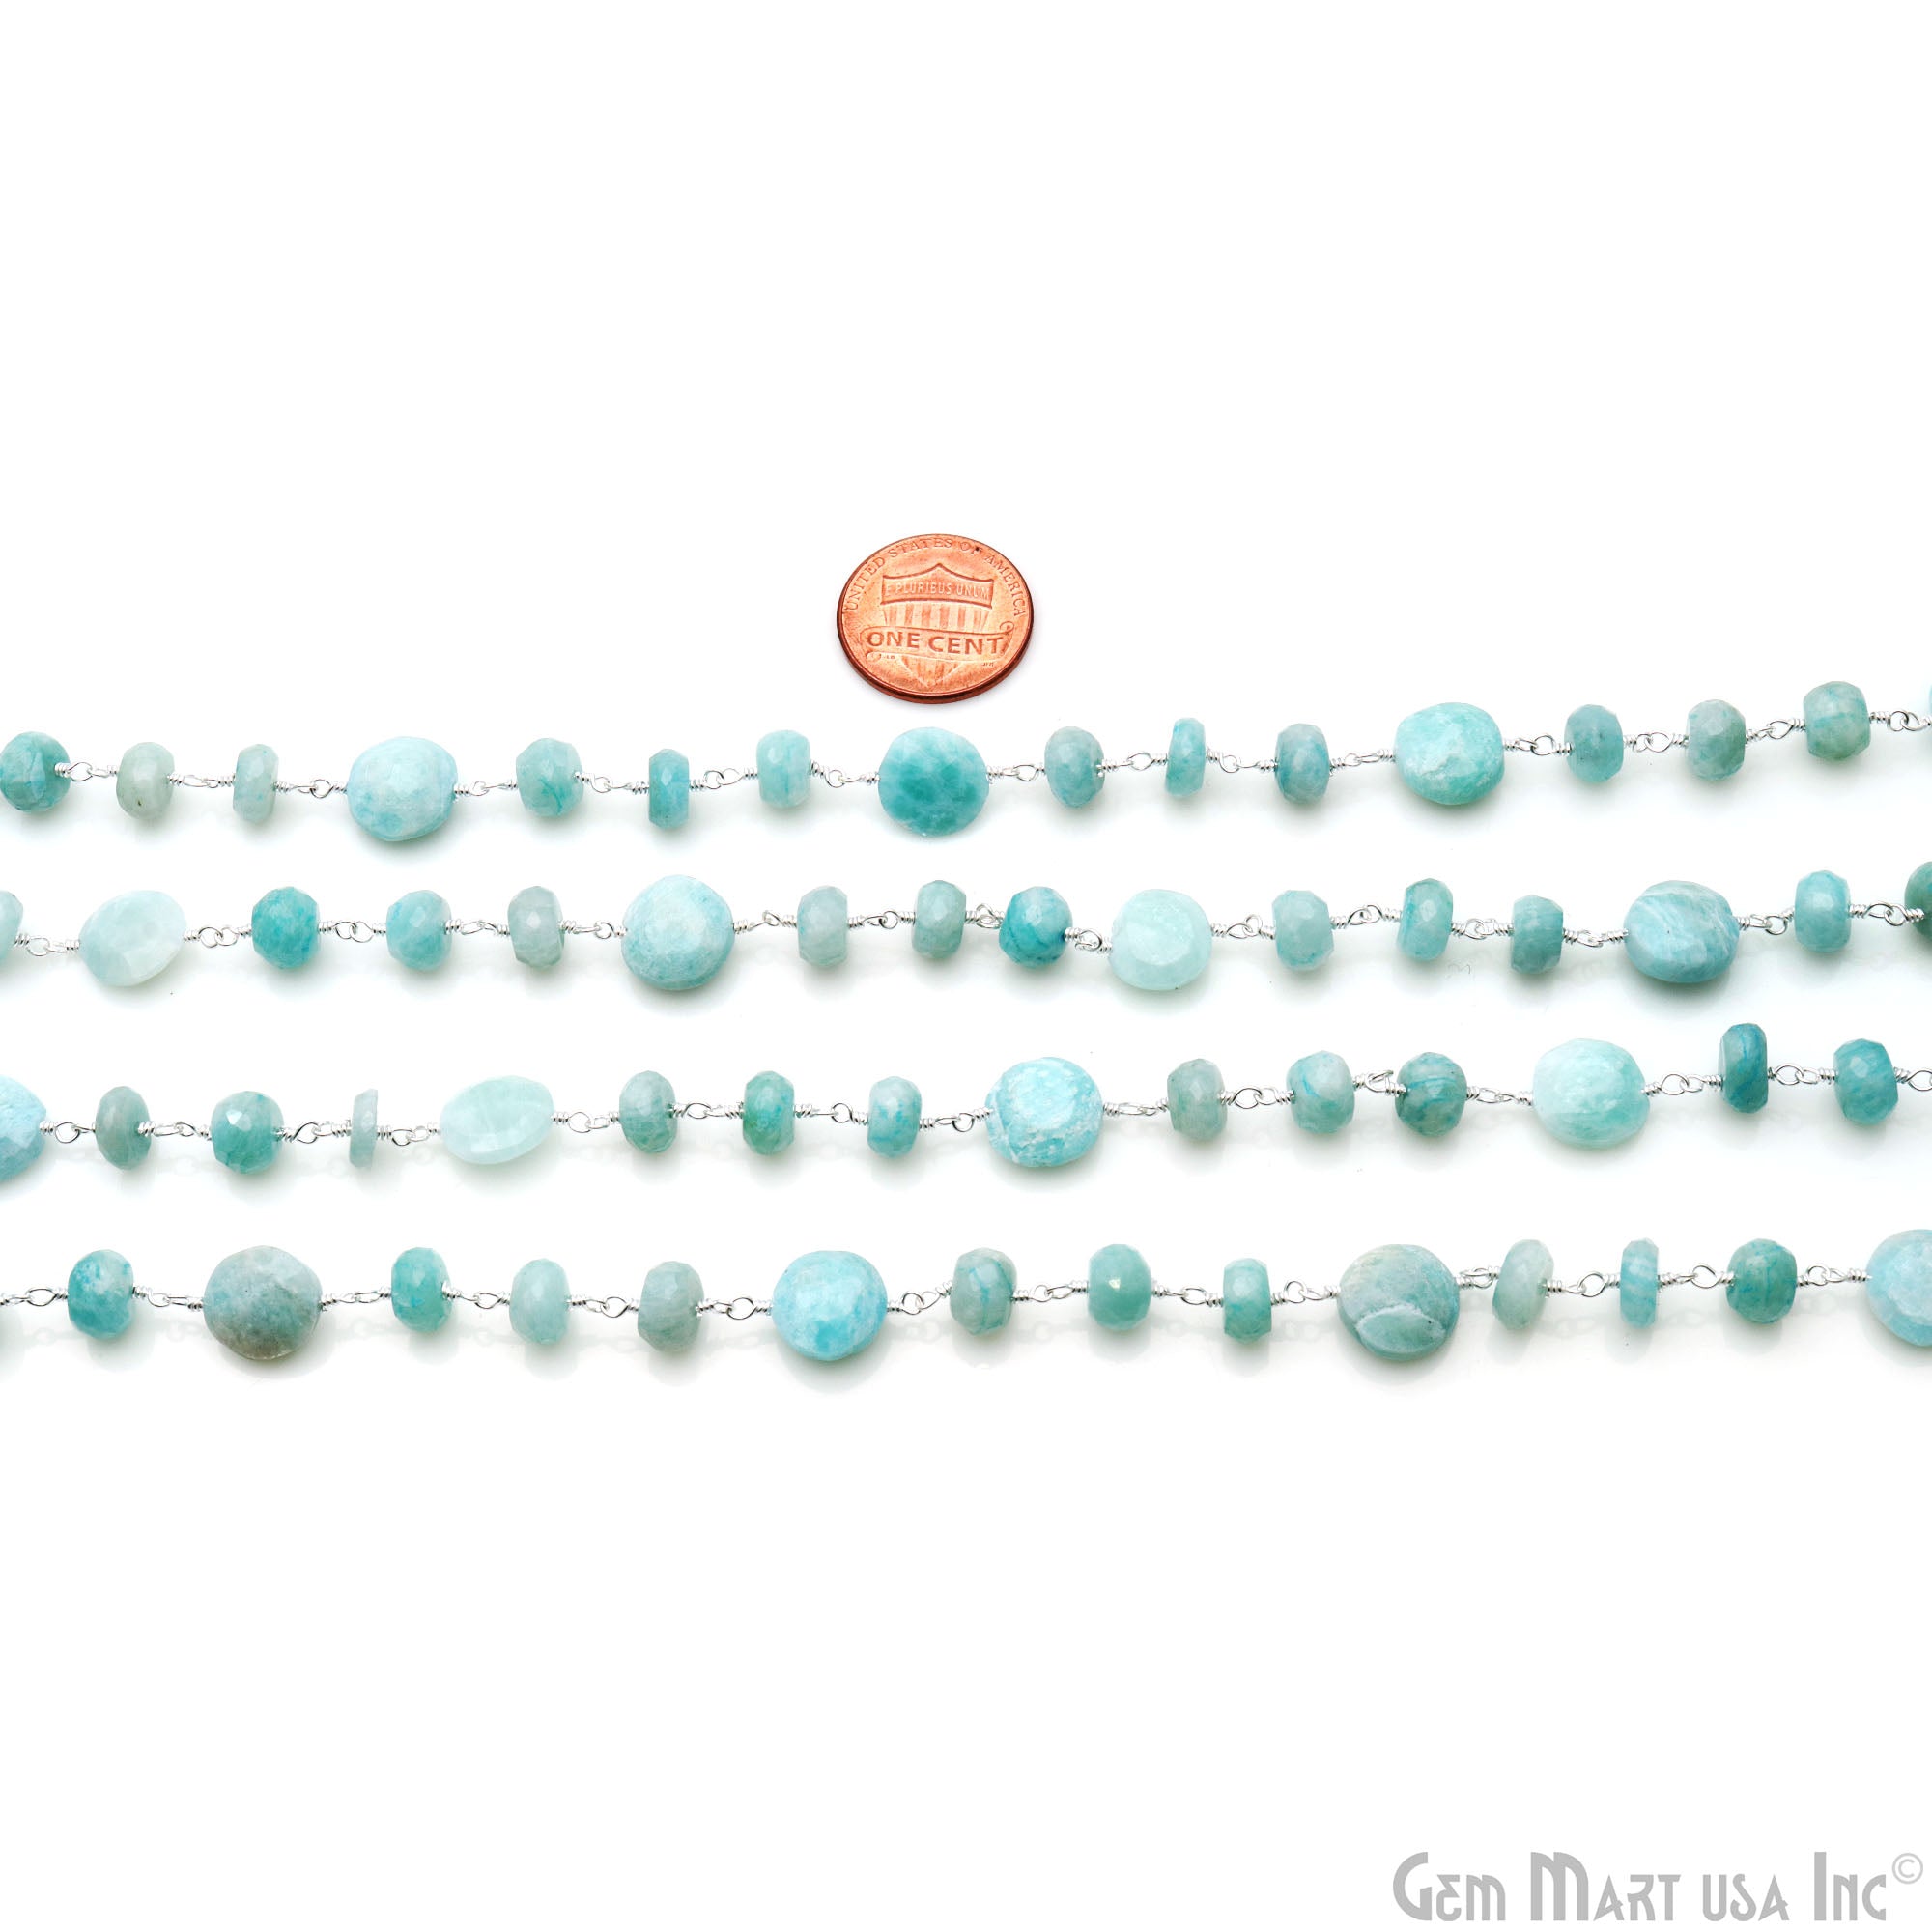 Amazonite Coin 7-8mm Silver Plated Rough Beads Rosary Chain